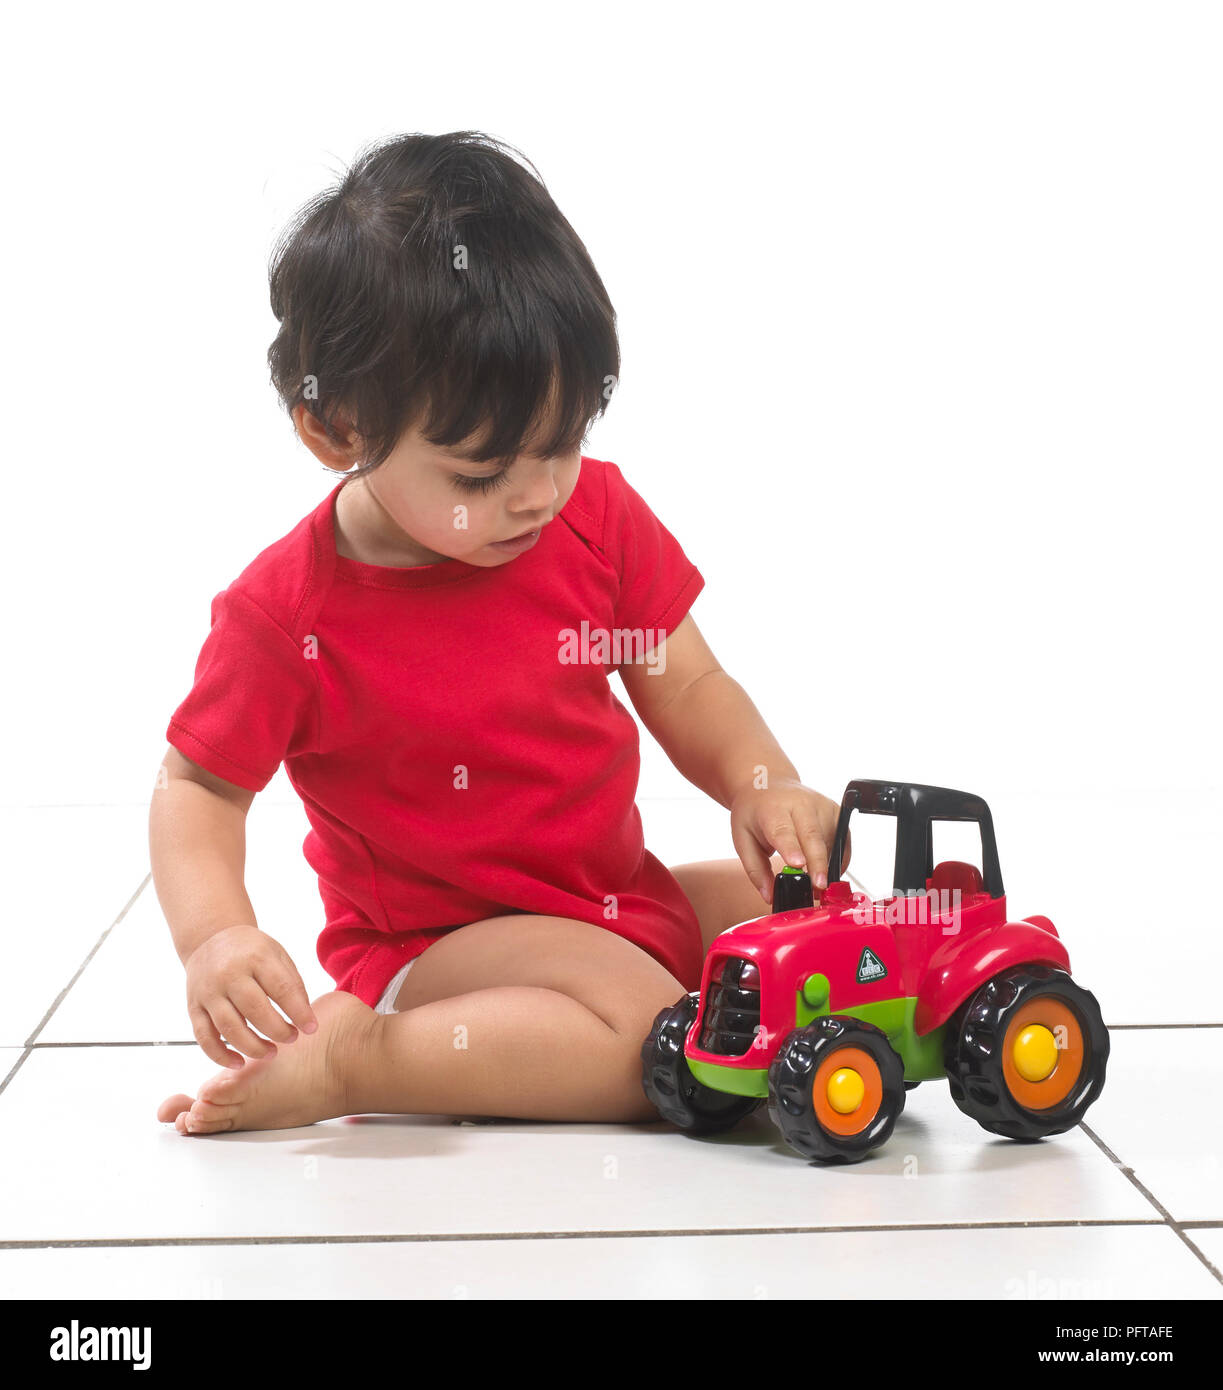 Baby boy (16 months) sitting with toy tractor Stock Photo